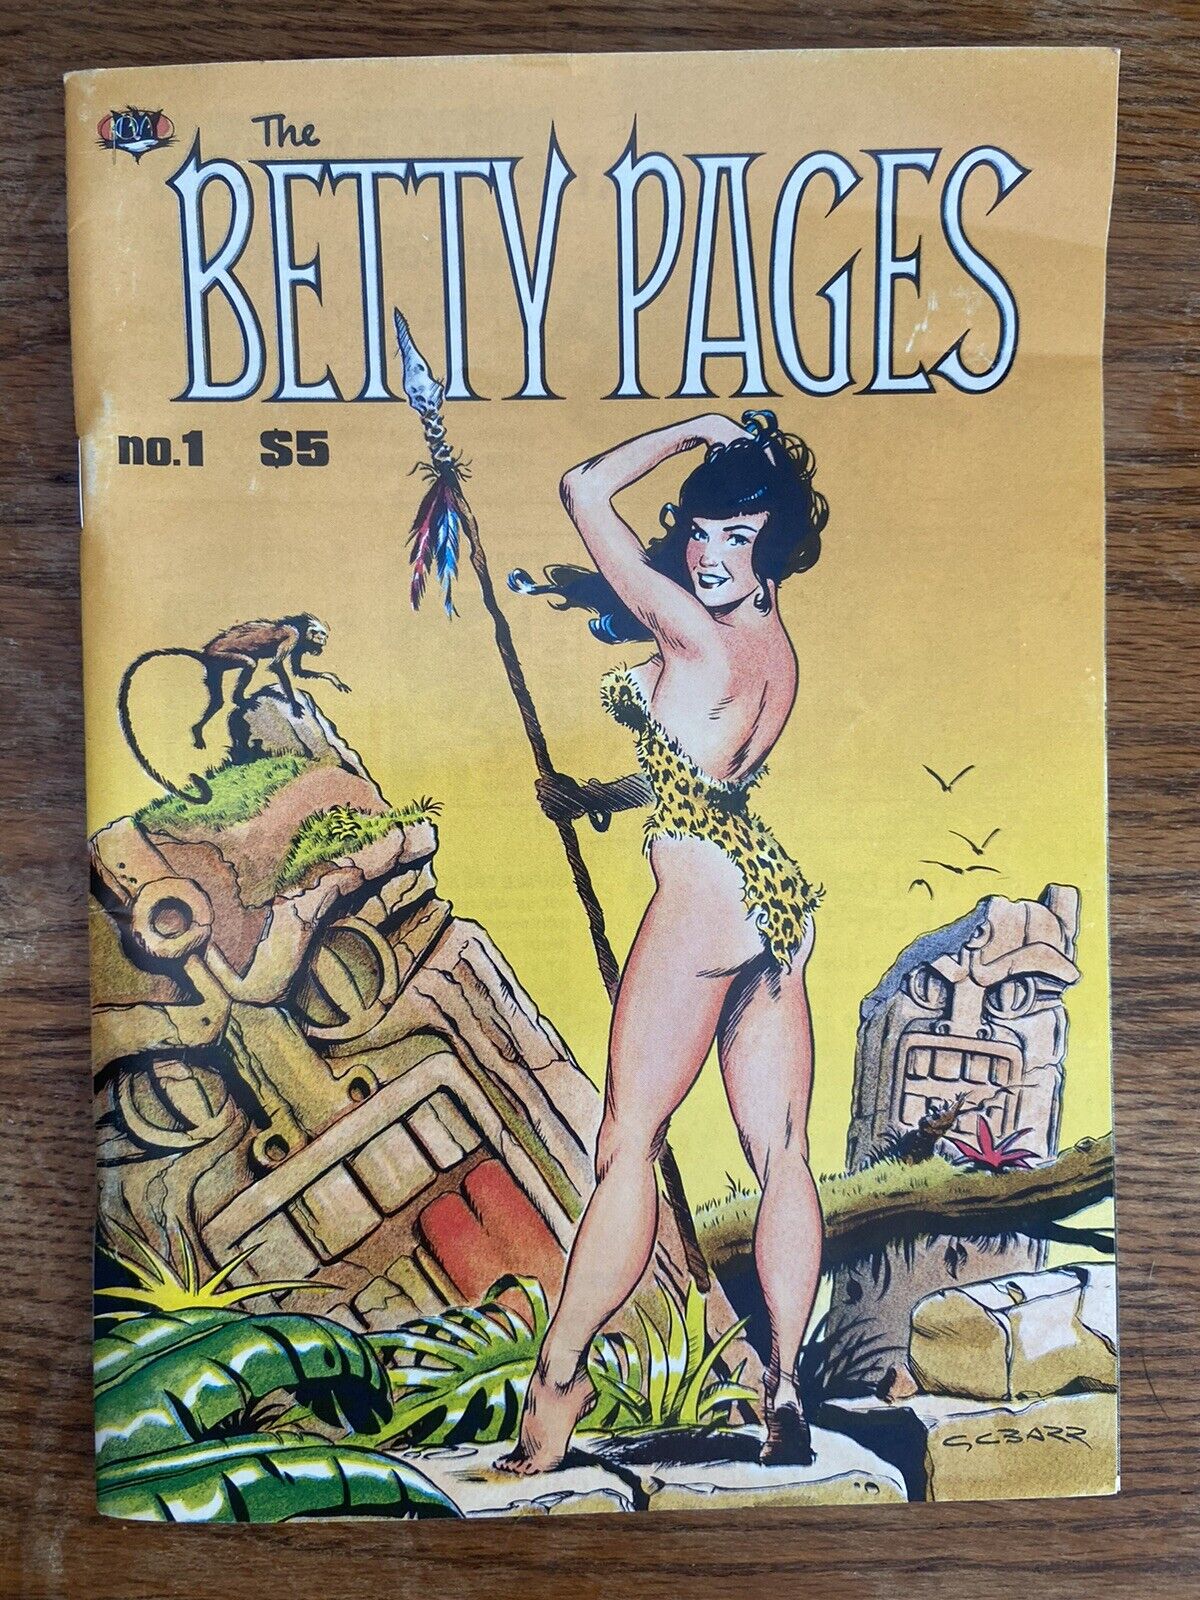 The Betty Pages No. 1 (1990) - Vintage Pinup Girl Pop Art Photos, Comic 